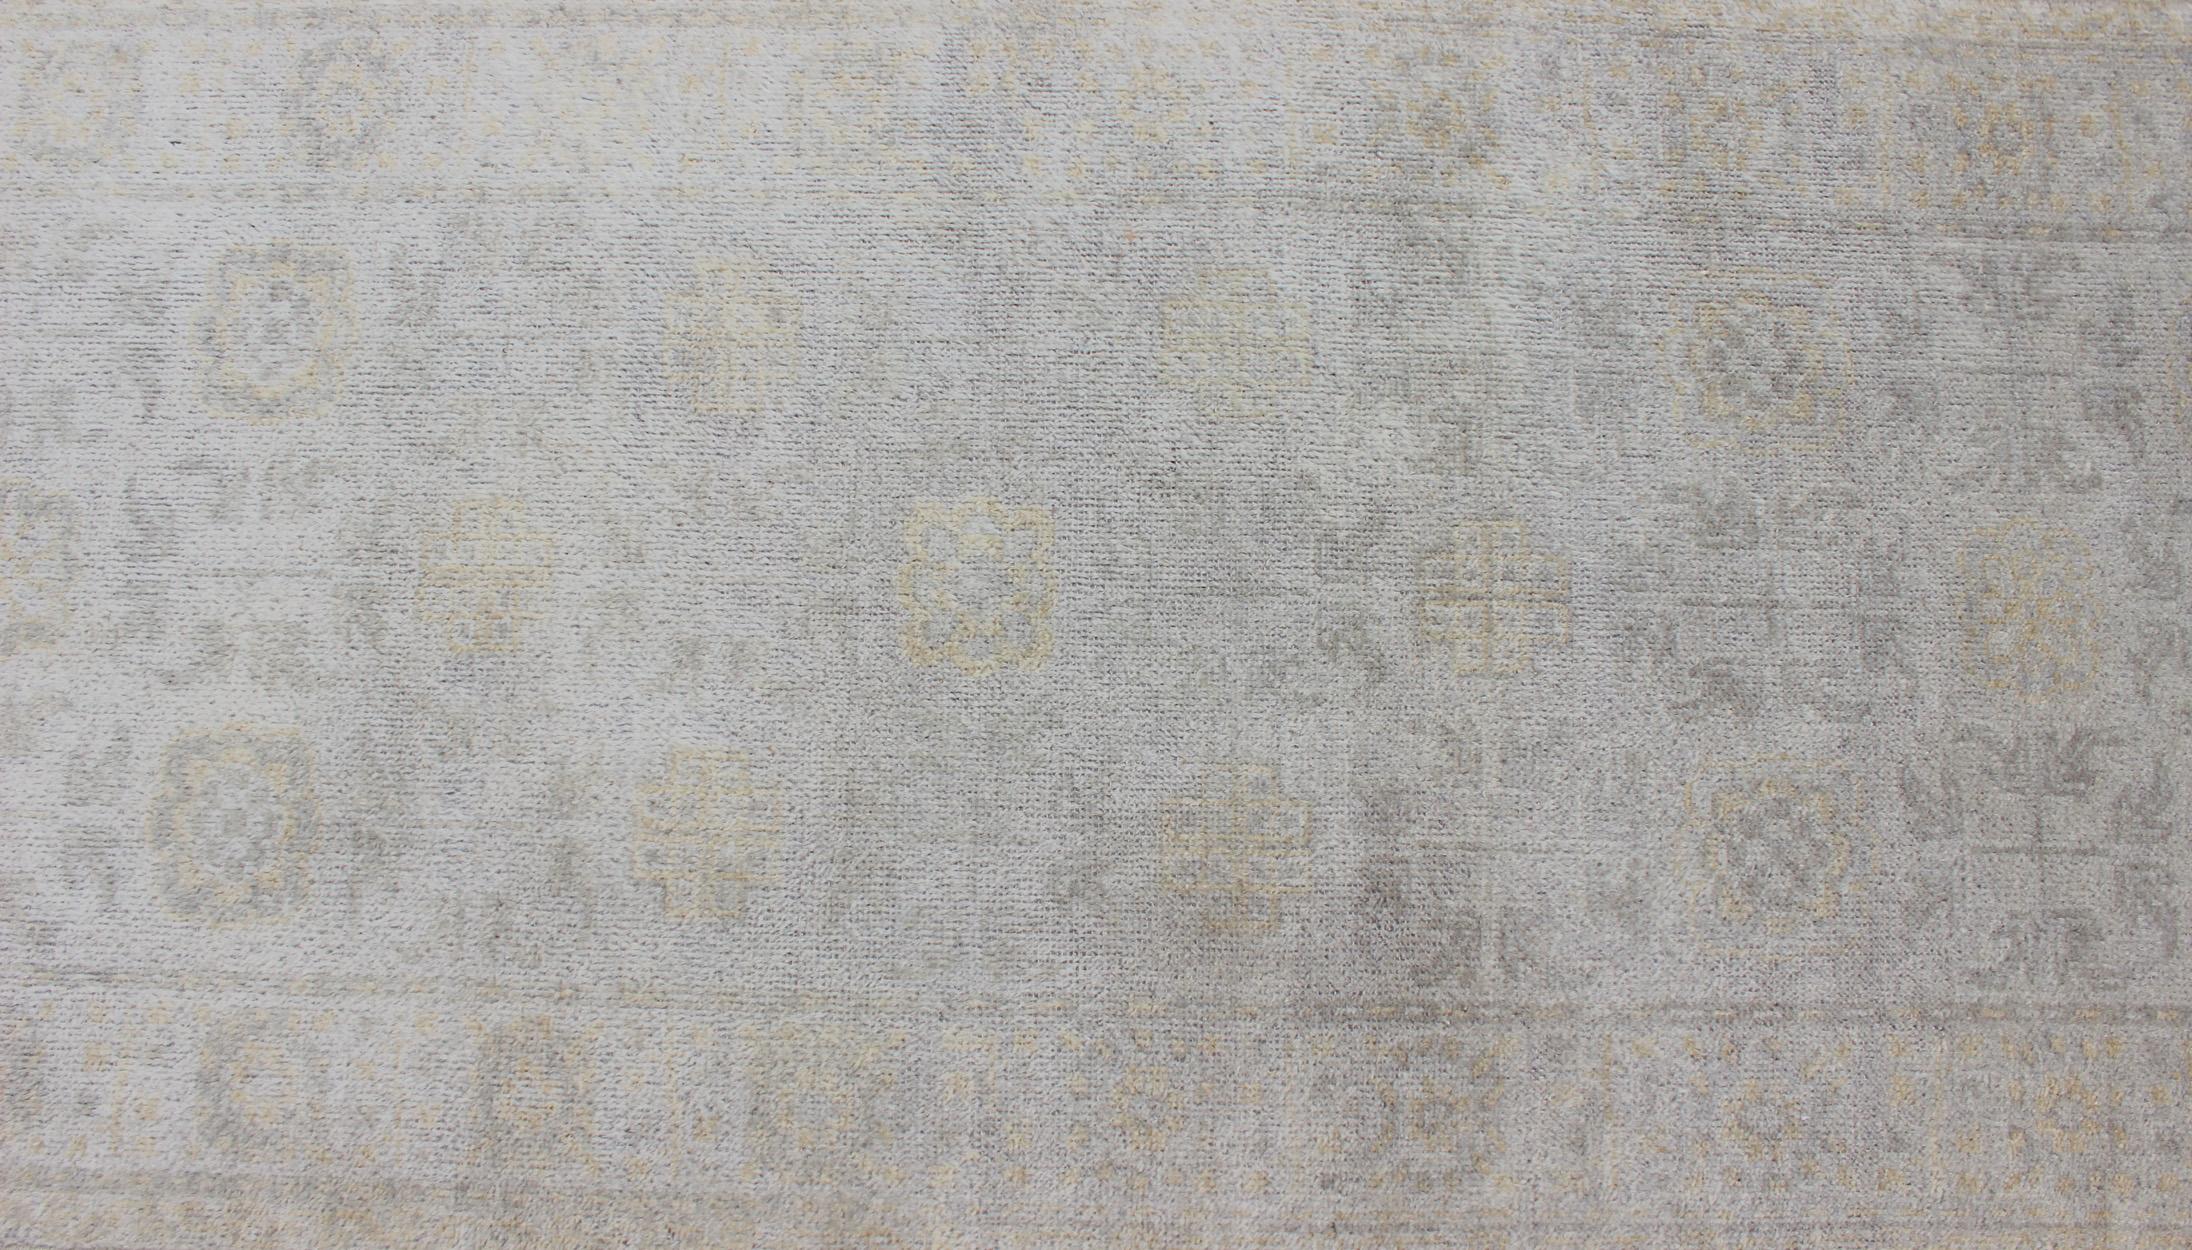 Modern Hand-Knotted Khotan Runner in Wool with Sub-Geometric Design.

Measures: 2'6 x 12'0.  

This modern hand knotted wool Khotan rug has been made by Keivan Woven Arts and features an all-over, sub-geometric design rendered in marigold and